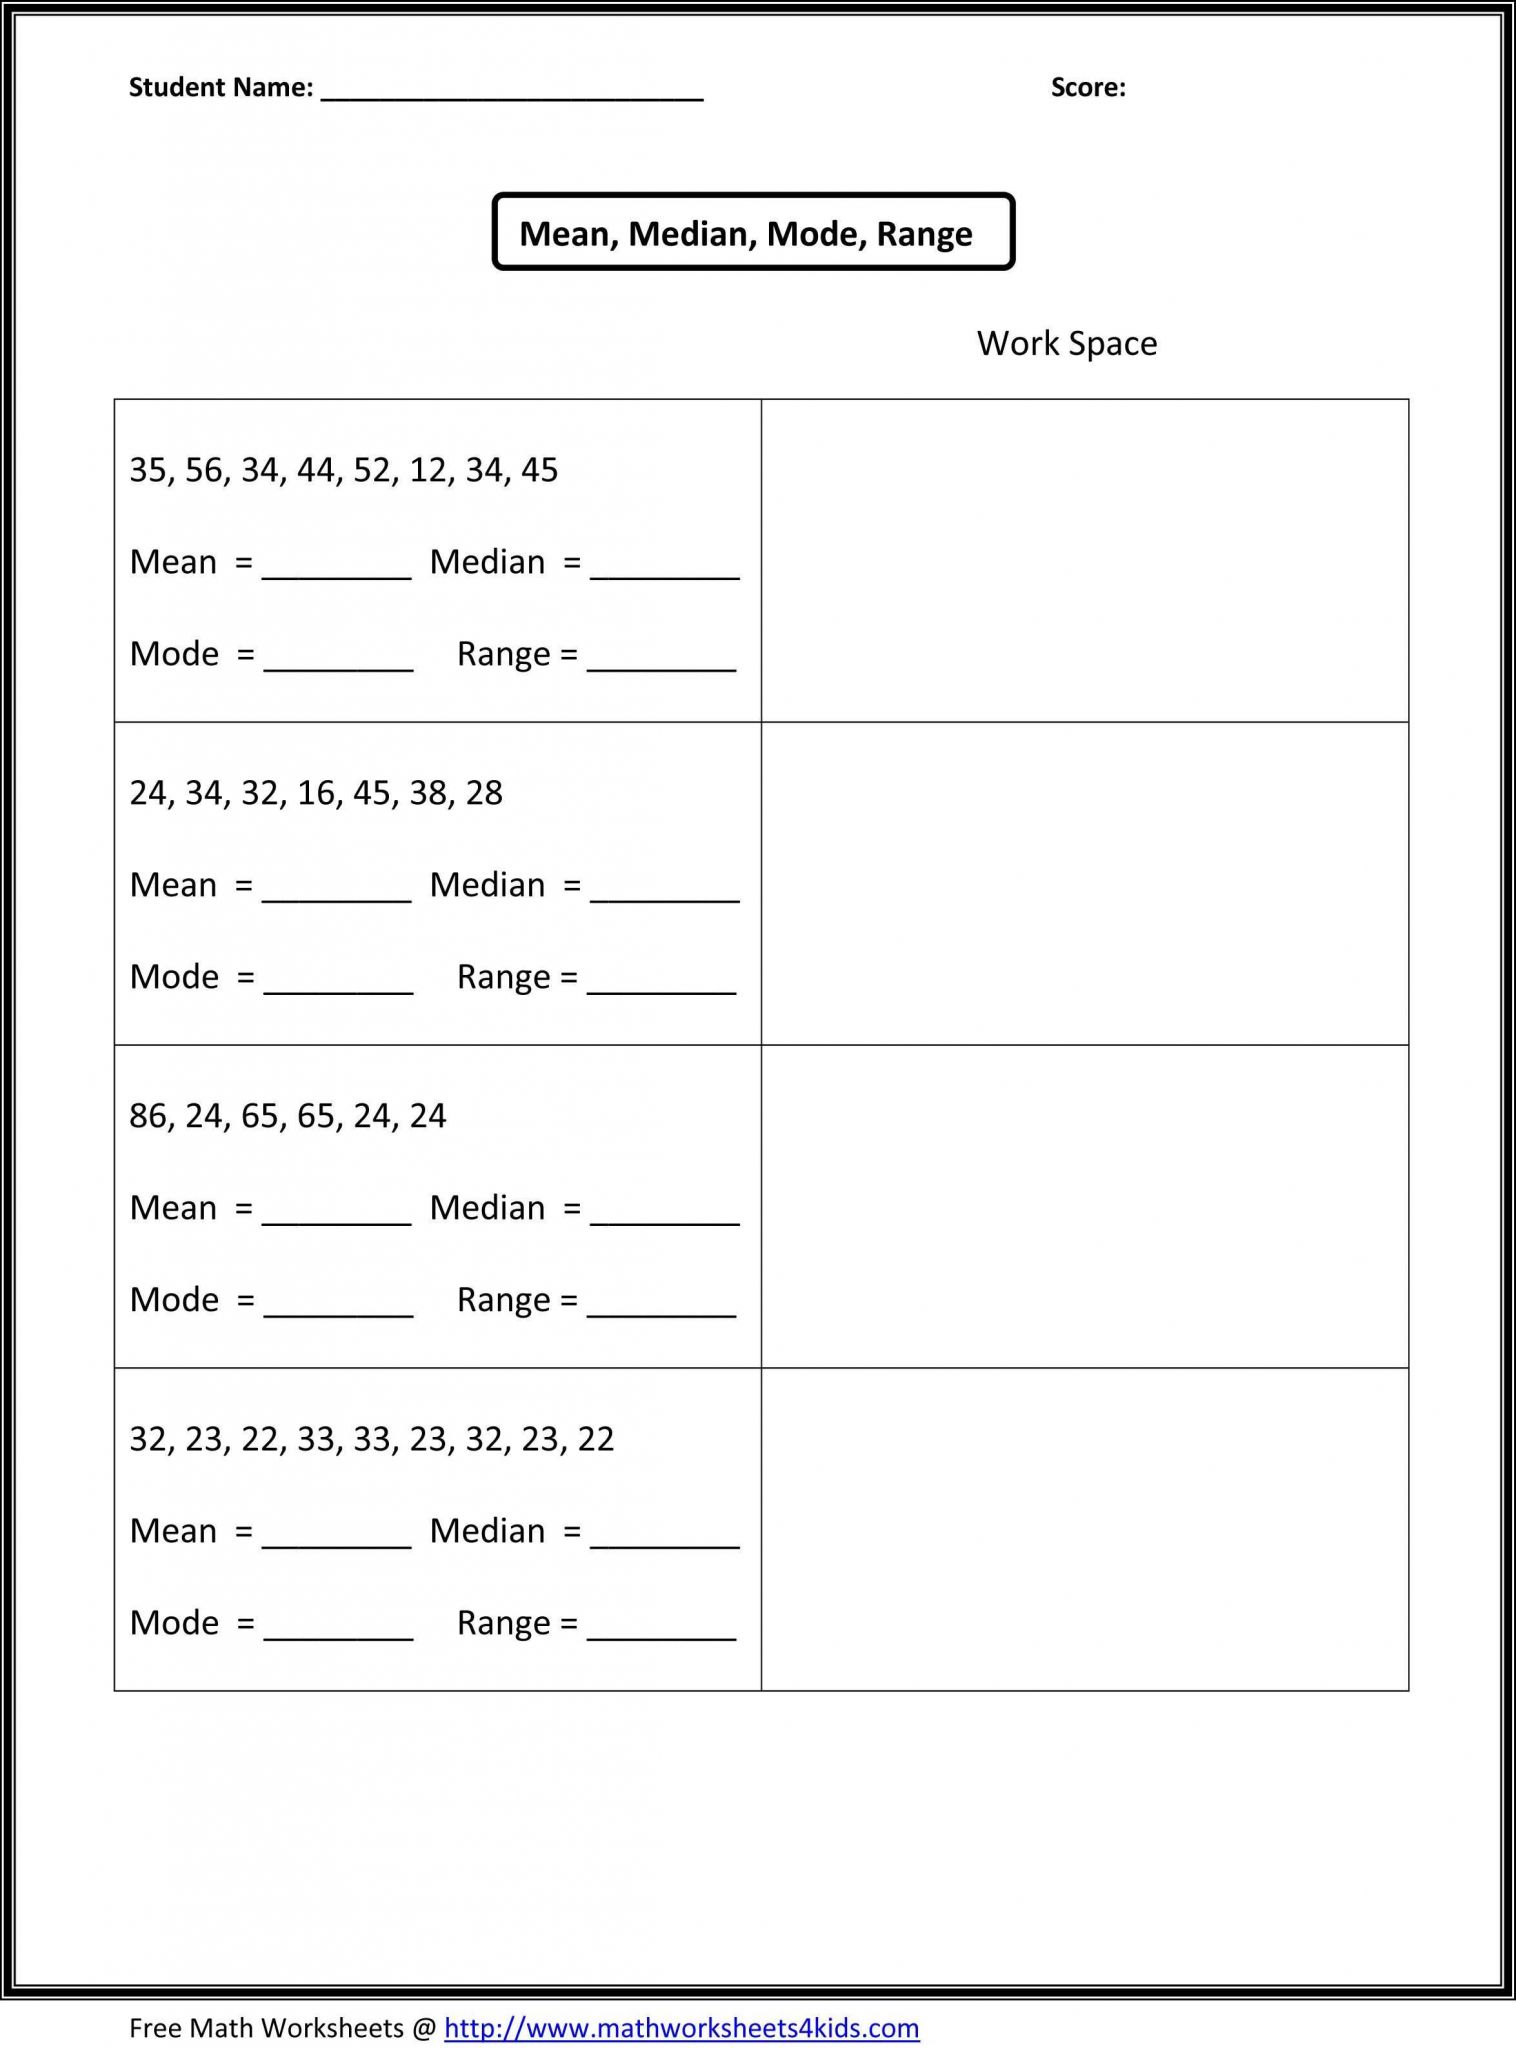 Mean Median Mode and Range Worksheets with Probability Crossword Puzzle Printable Crossword Puzzle Gallery